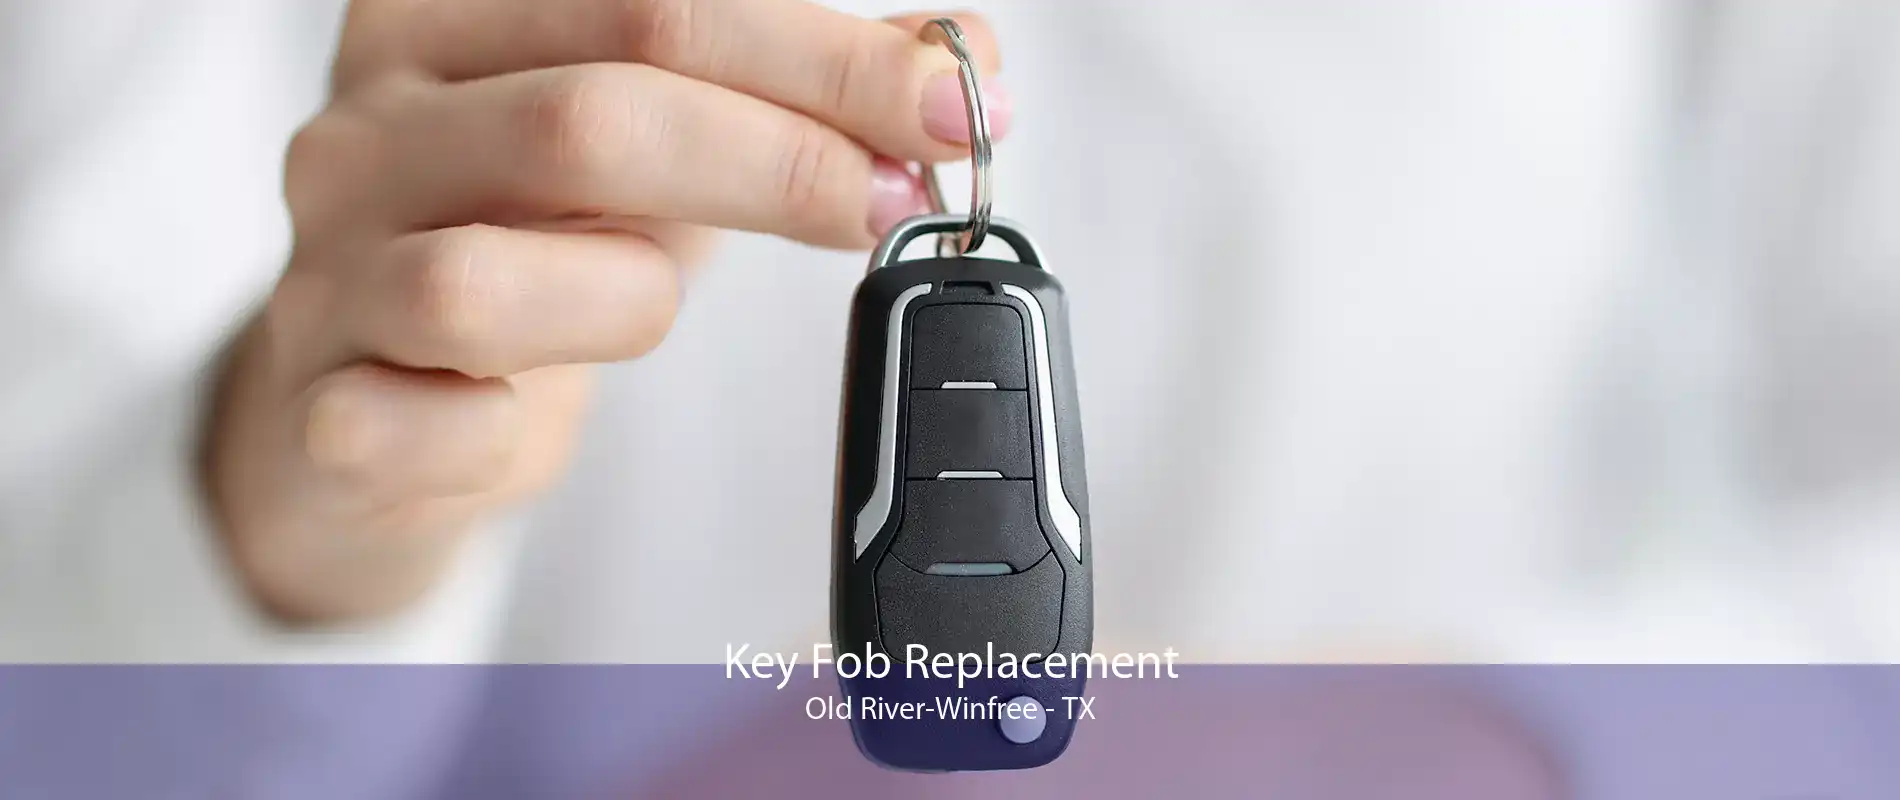 Key Fob Replacement Old River-Winfree - TX